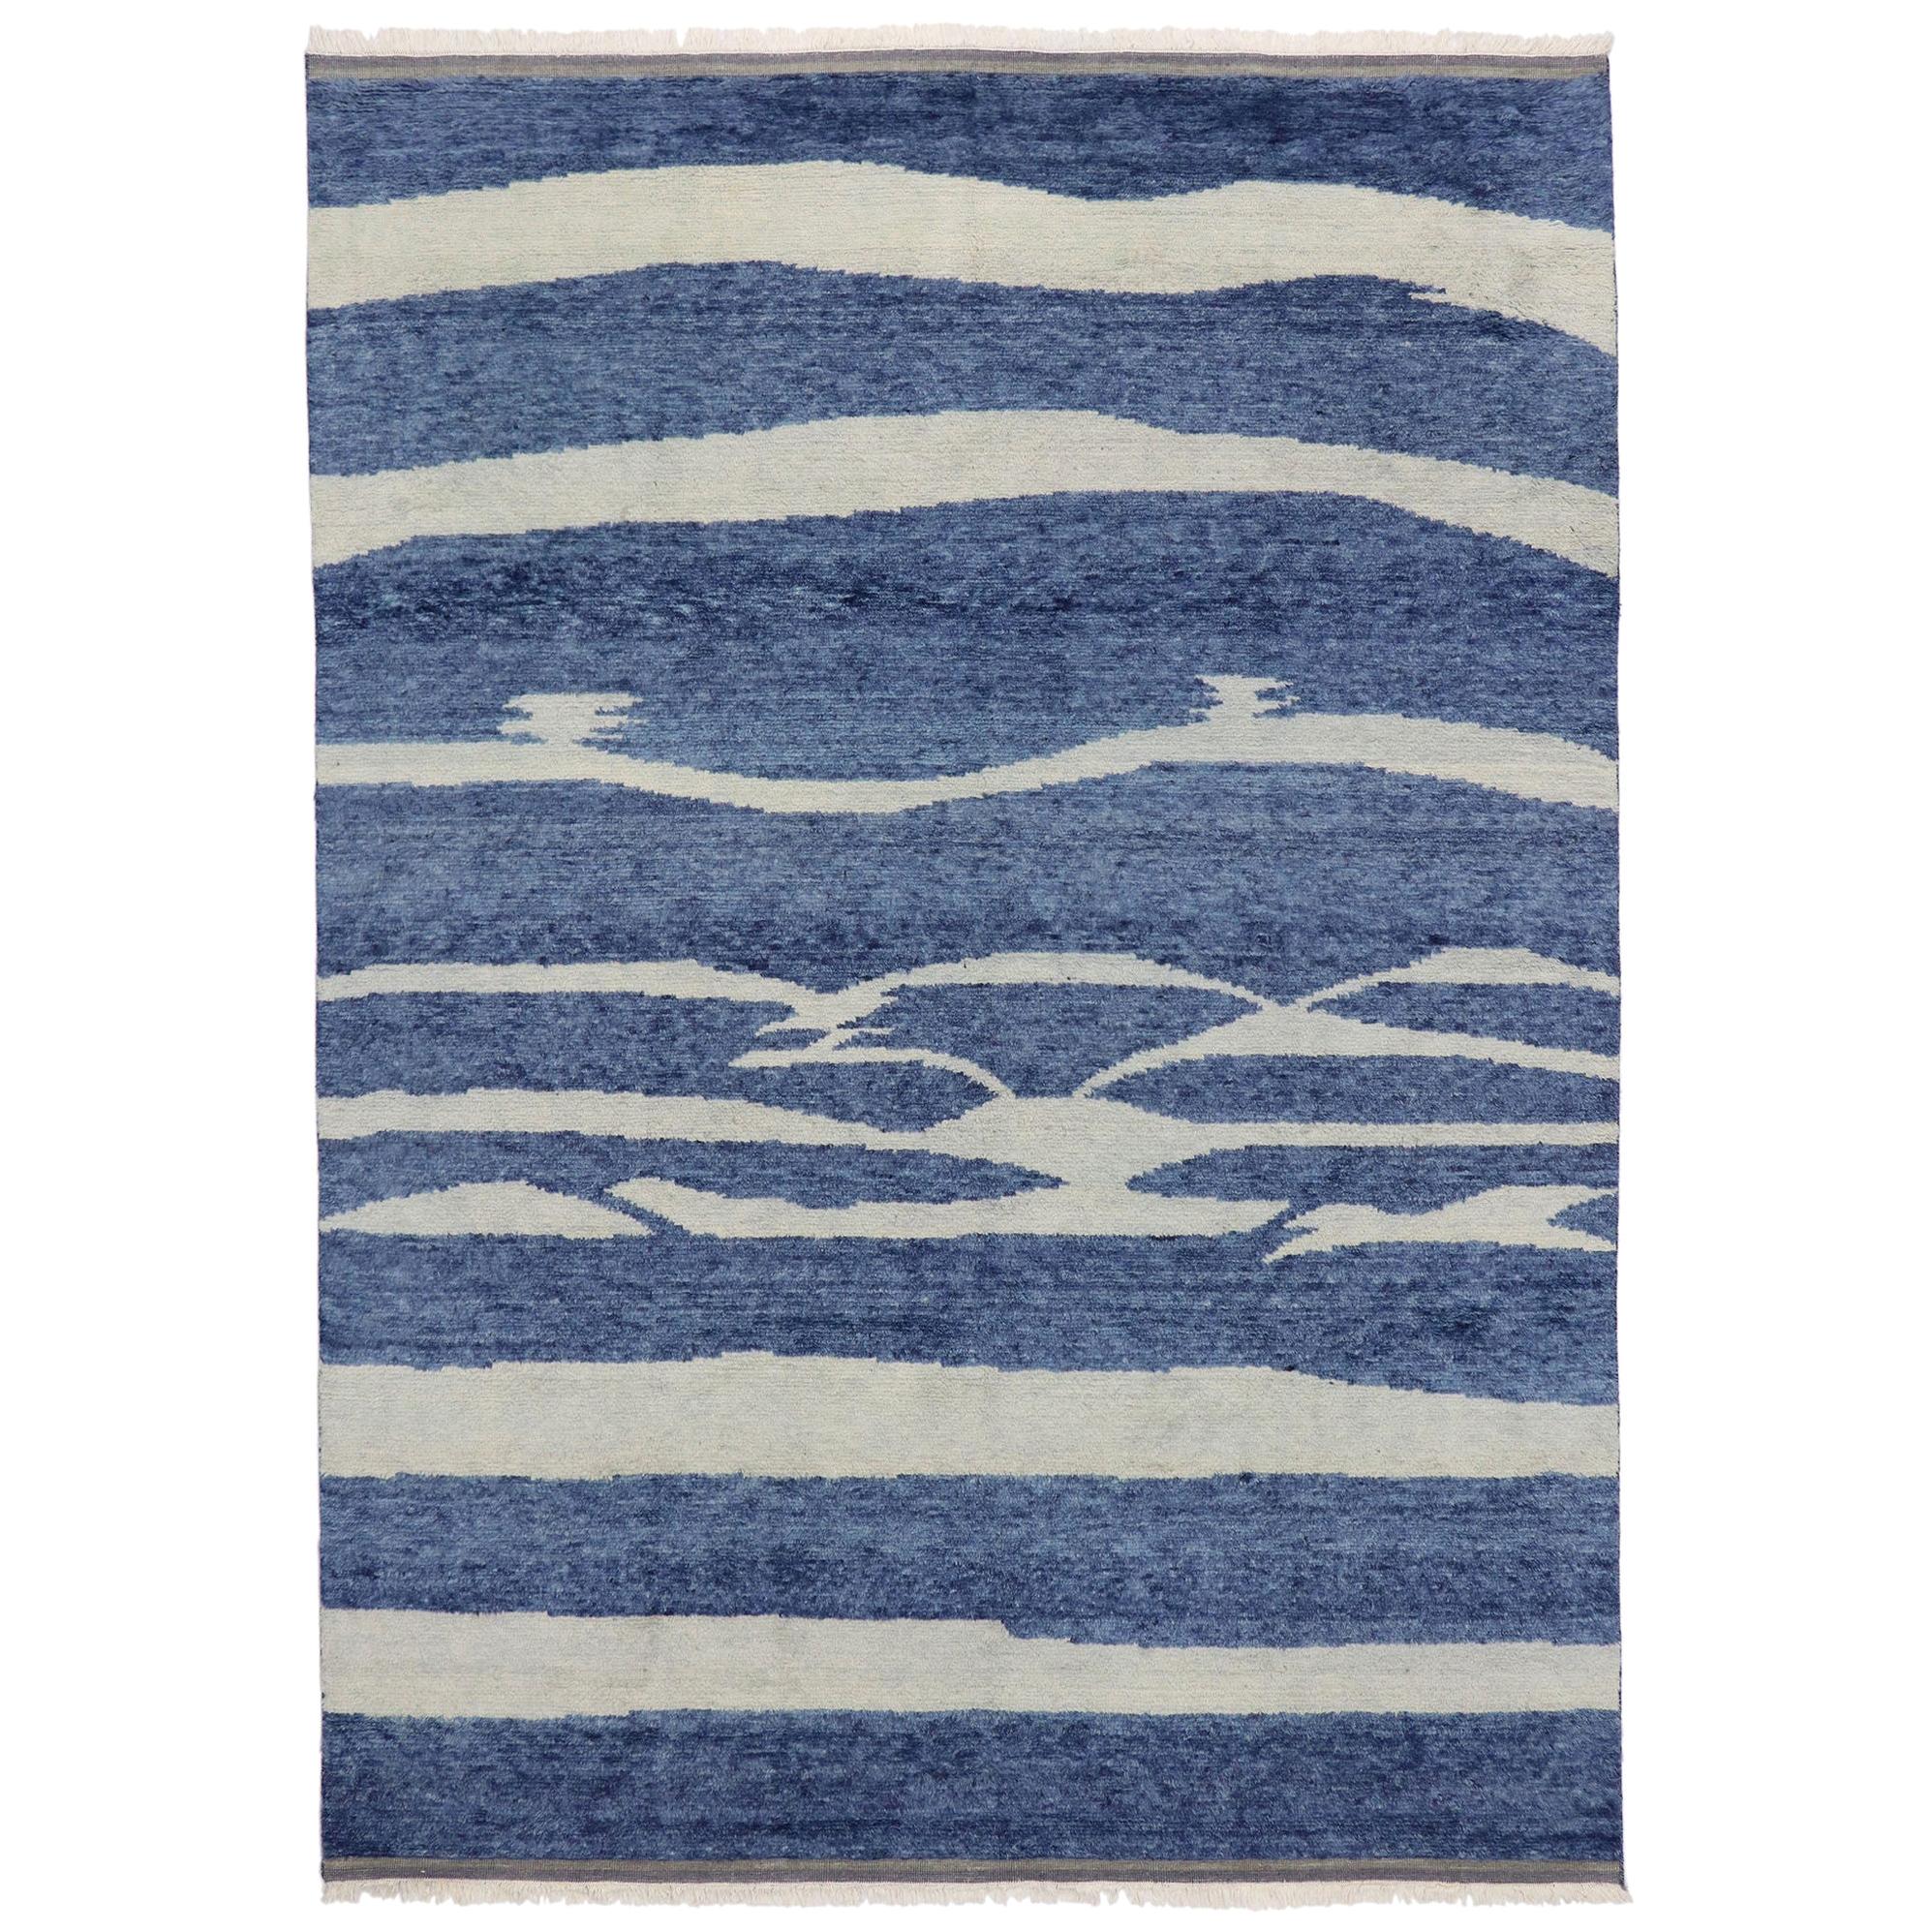 New Contemporary Moroccan Beach Style Rug with Coastal Design